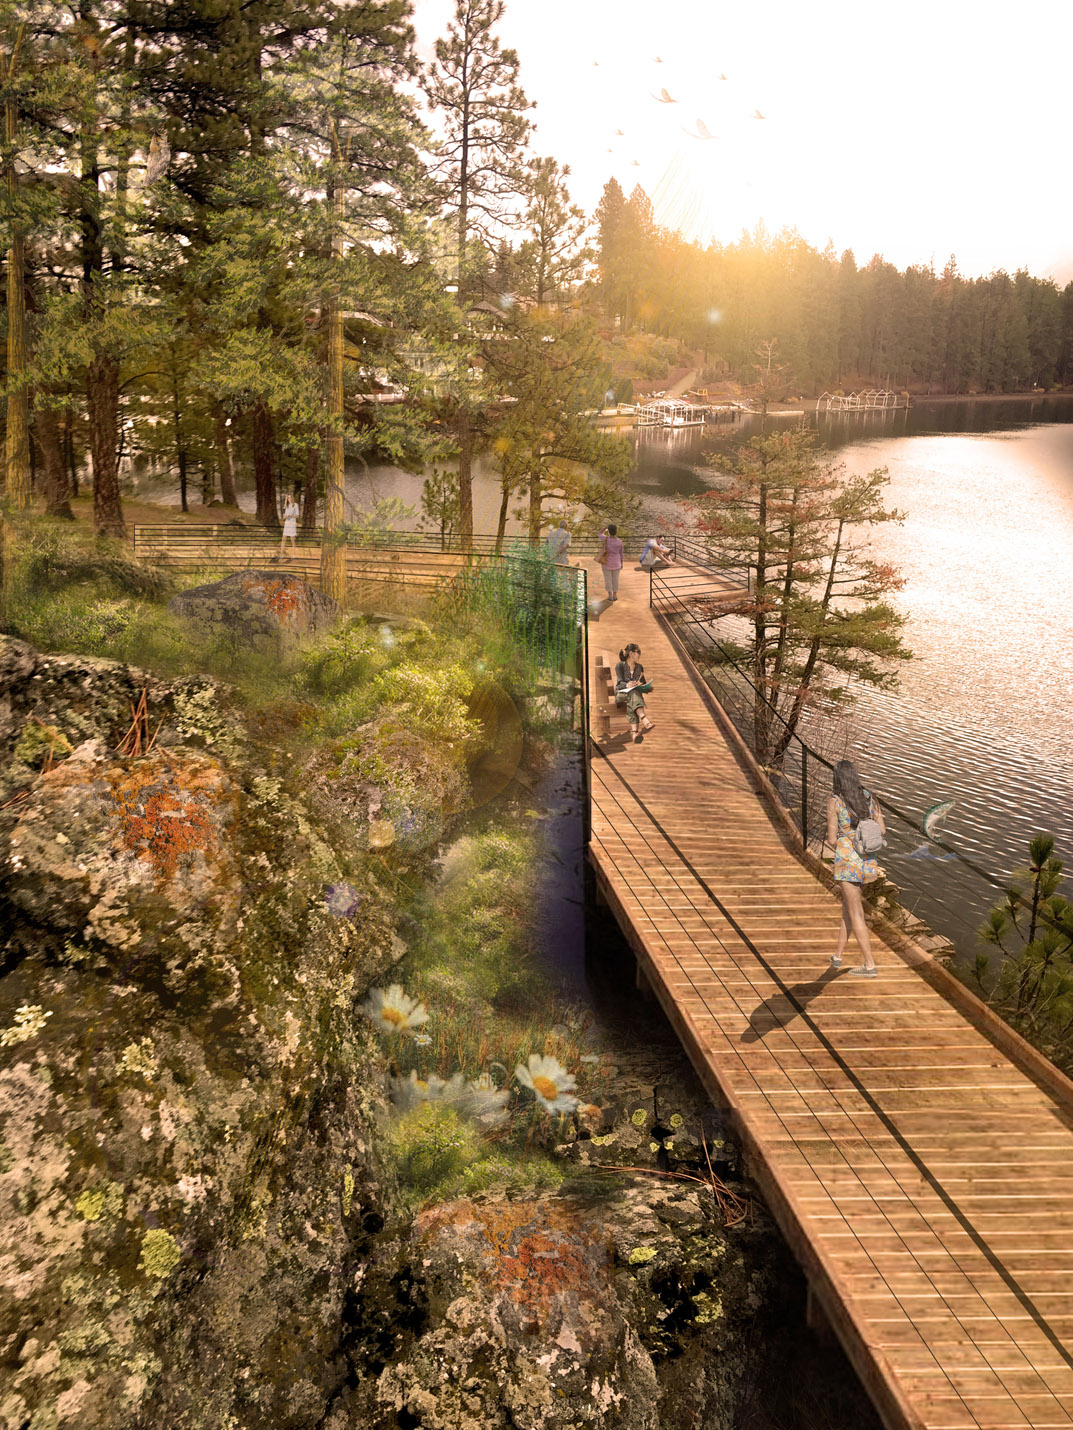 Civitas design for boardwalks on Spokane River’s Black Bay offers a river experience and views without damaging fragile riverbanks (rendering courtesy of Civitas Inc.).